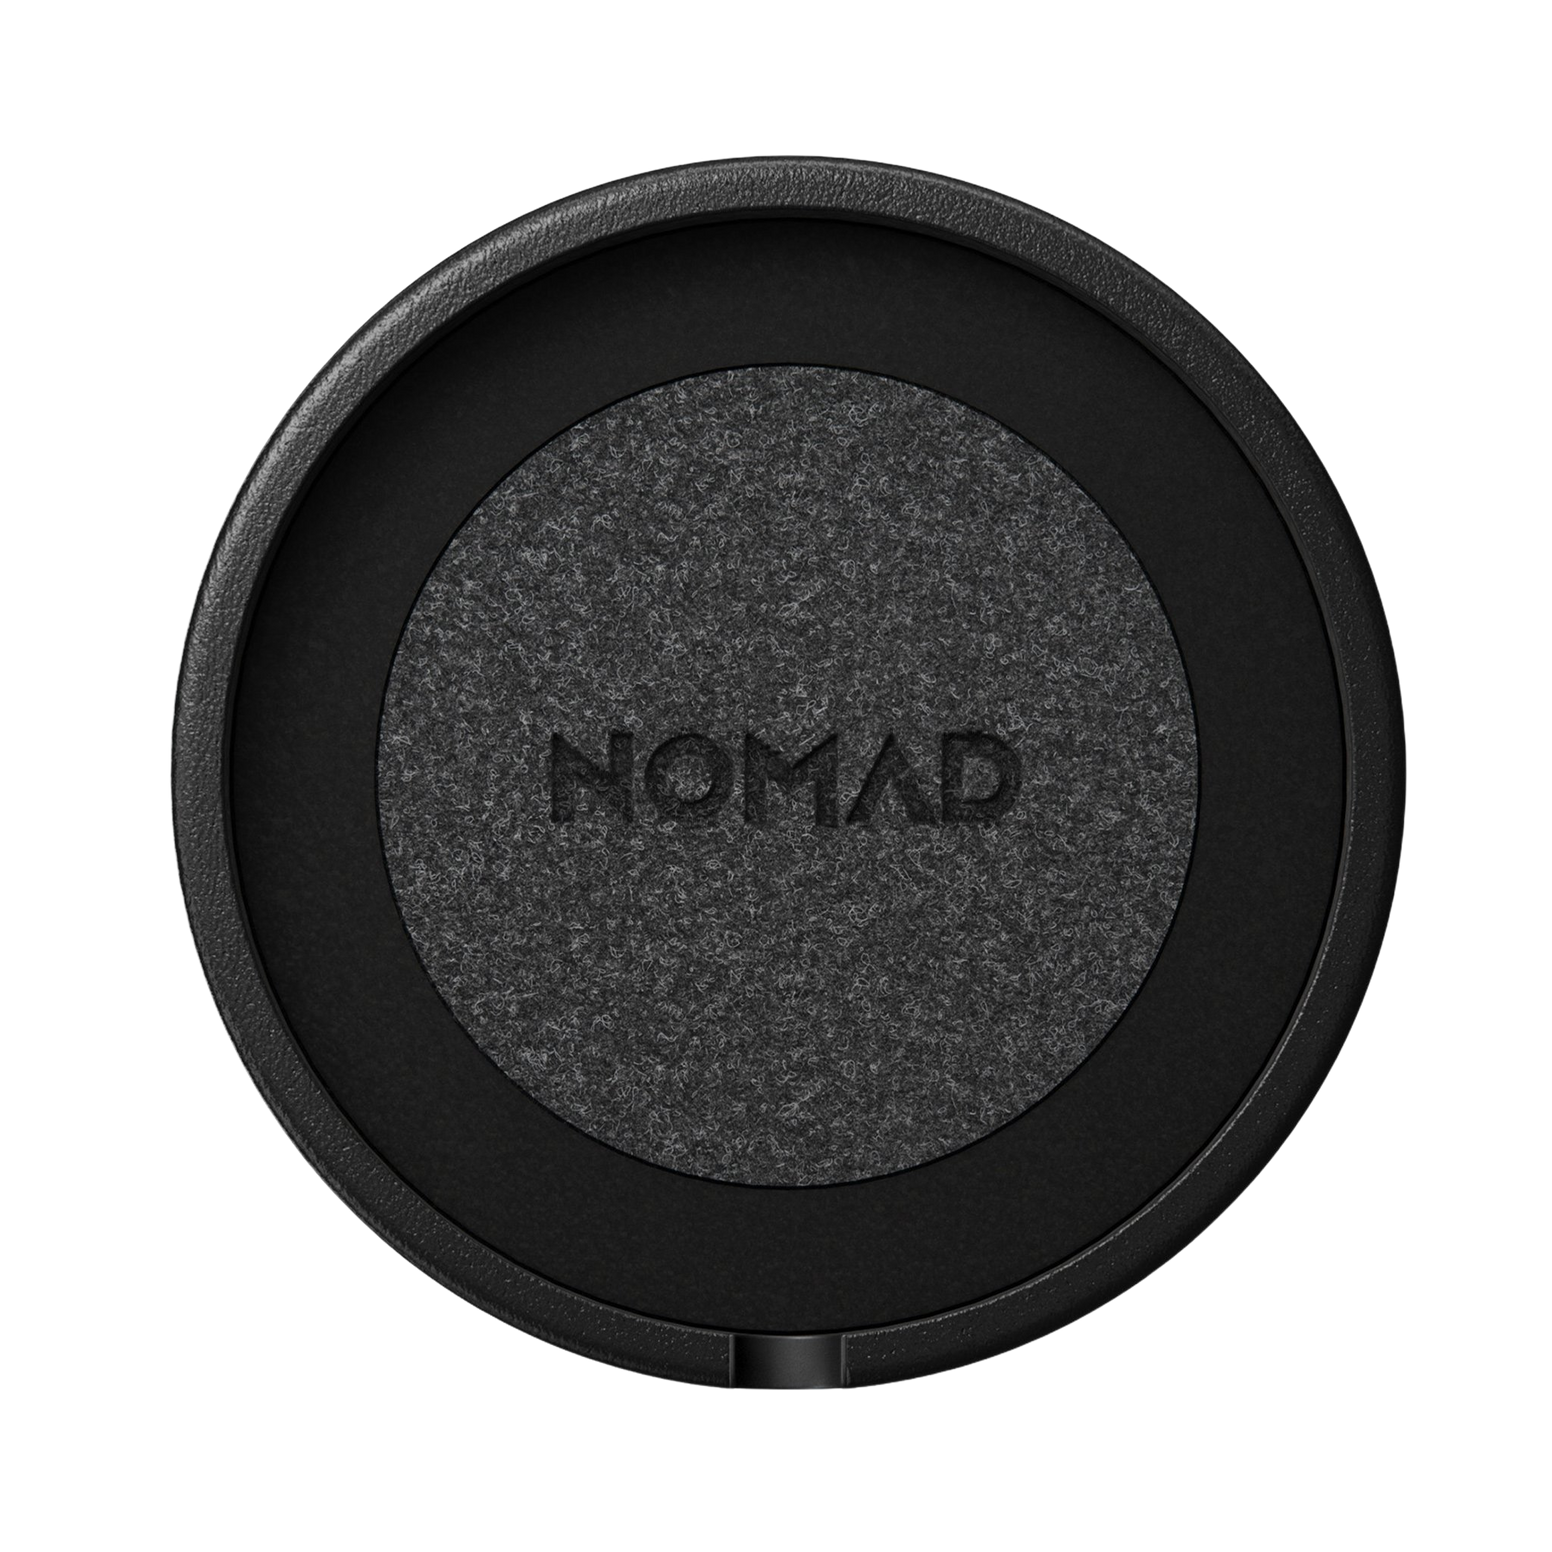 Nomad Horween Leather Cover for MagSafe Puck - Black - Discontinued